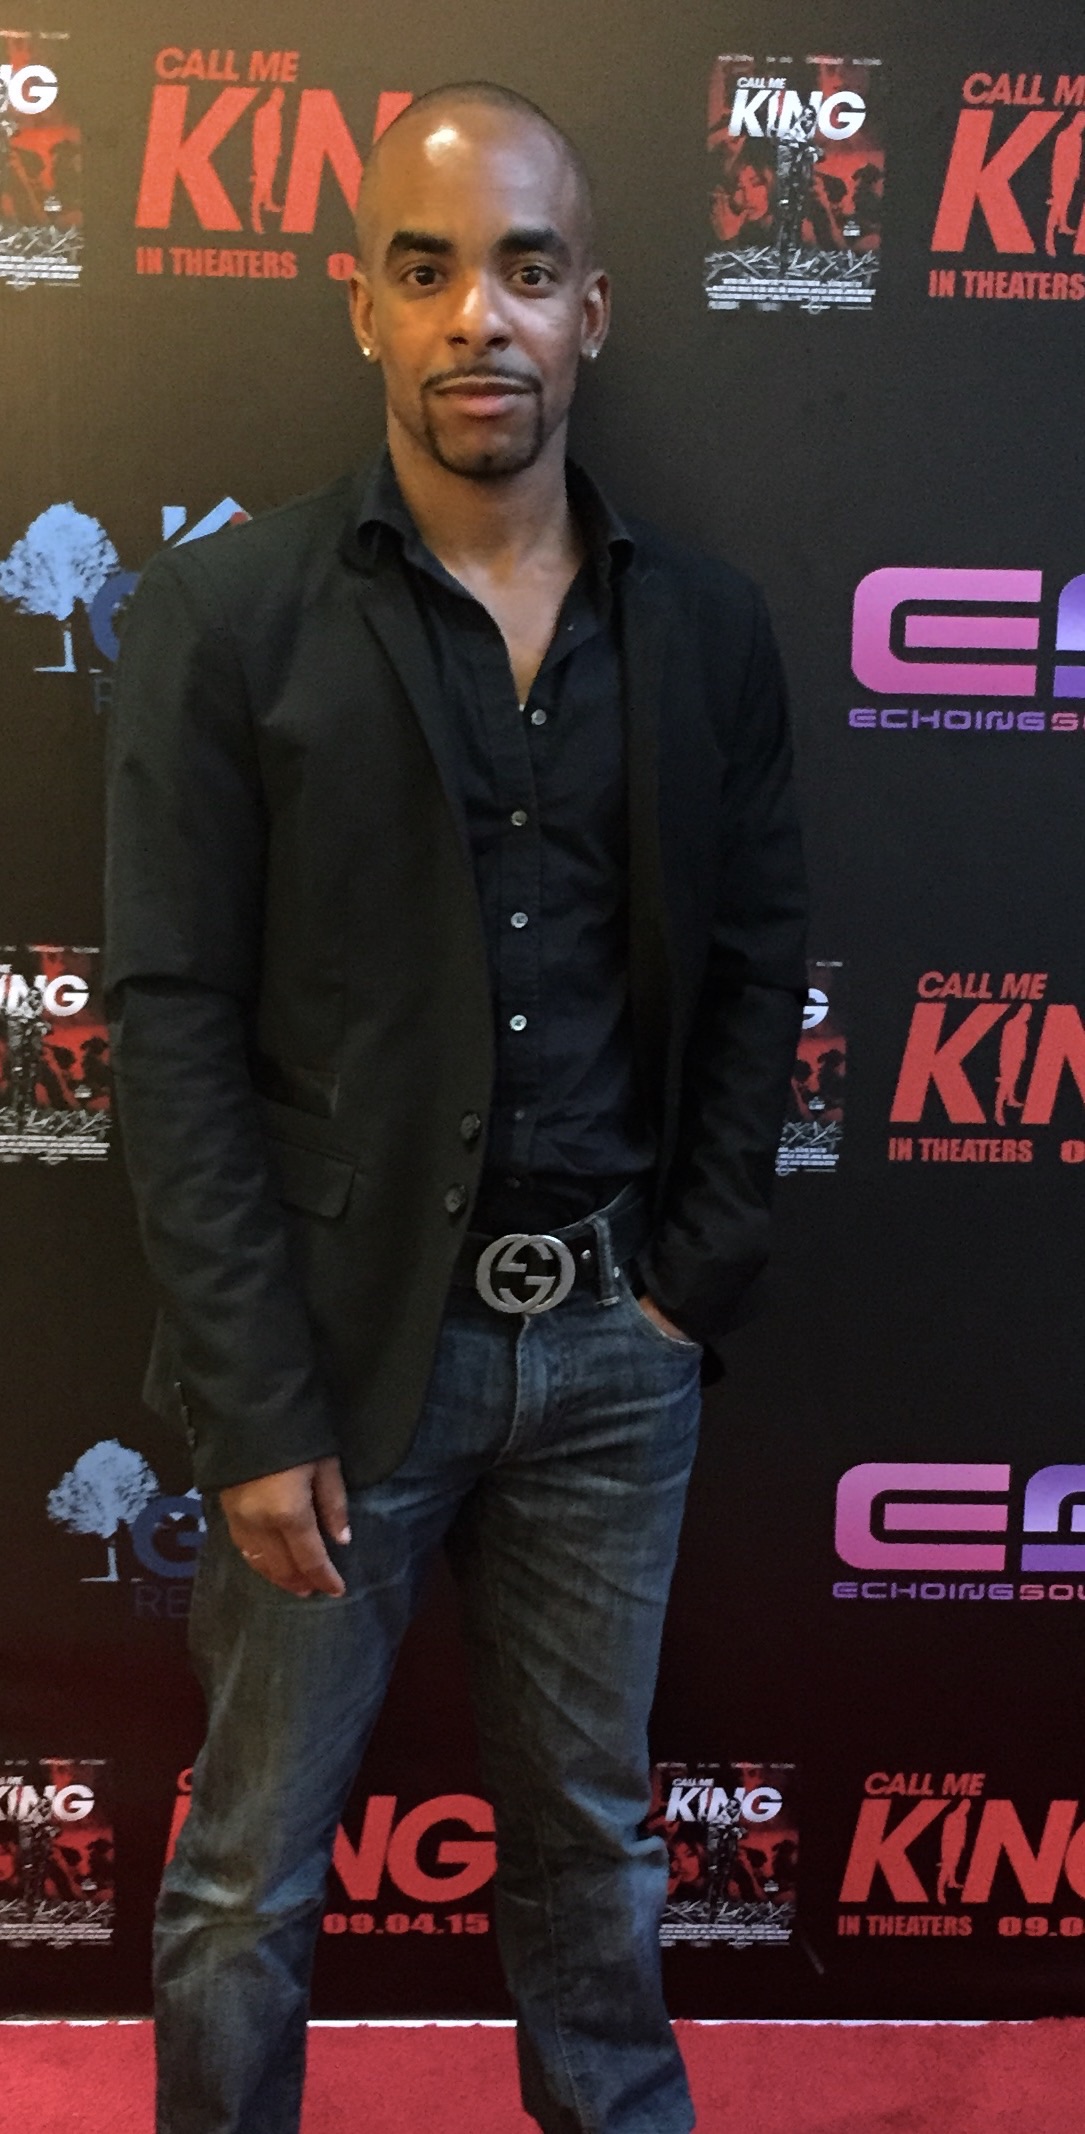 Actor/producer Phil Adkins at the premiere of Call me King.